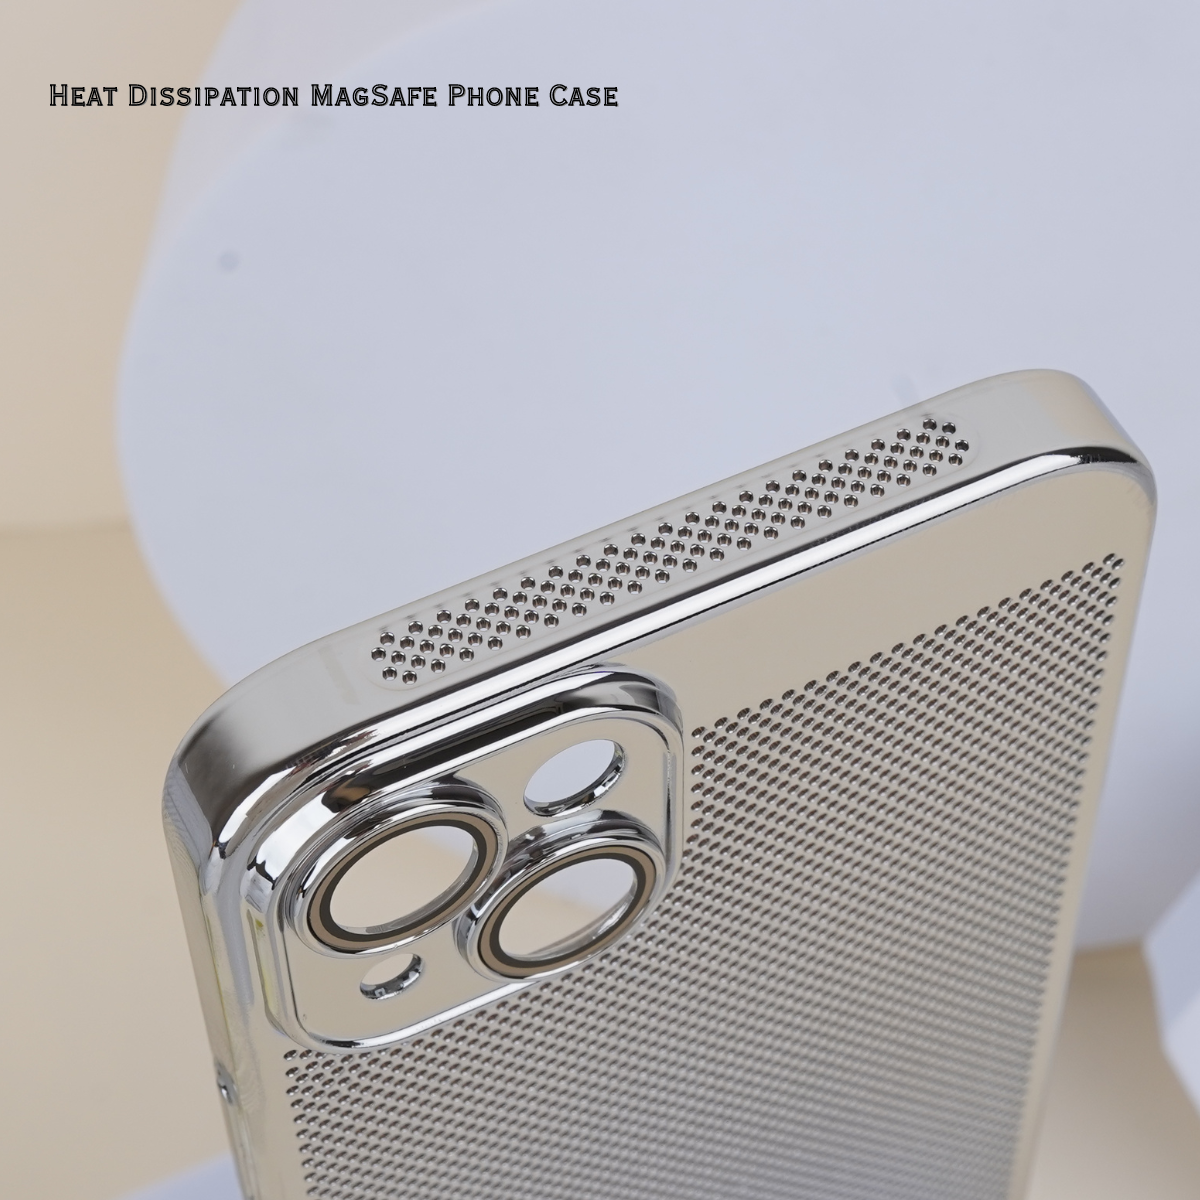 Heat Dissipation MagSafe Phone Case IP 14 Series (BUY 1 GET 1 FREE 🔥)